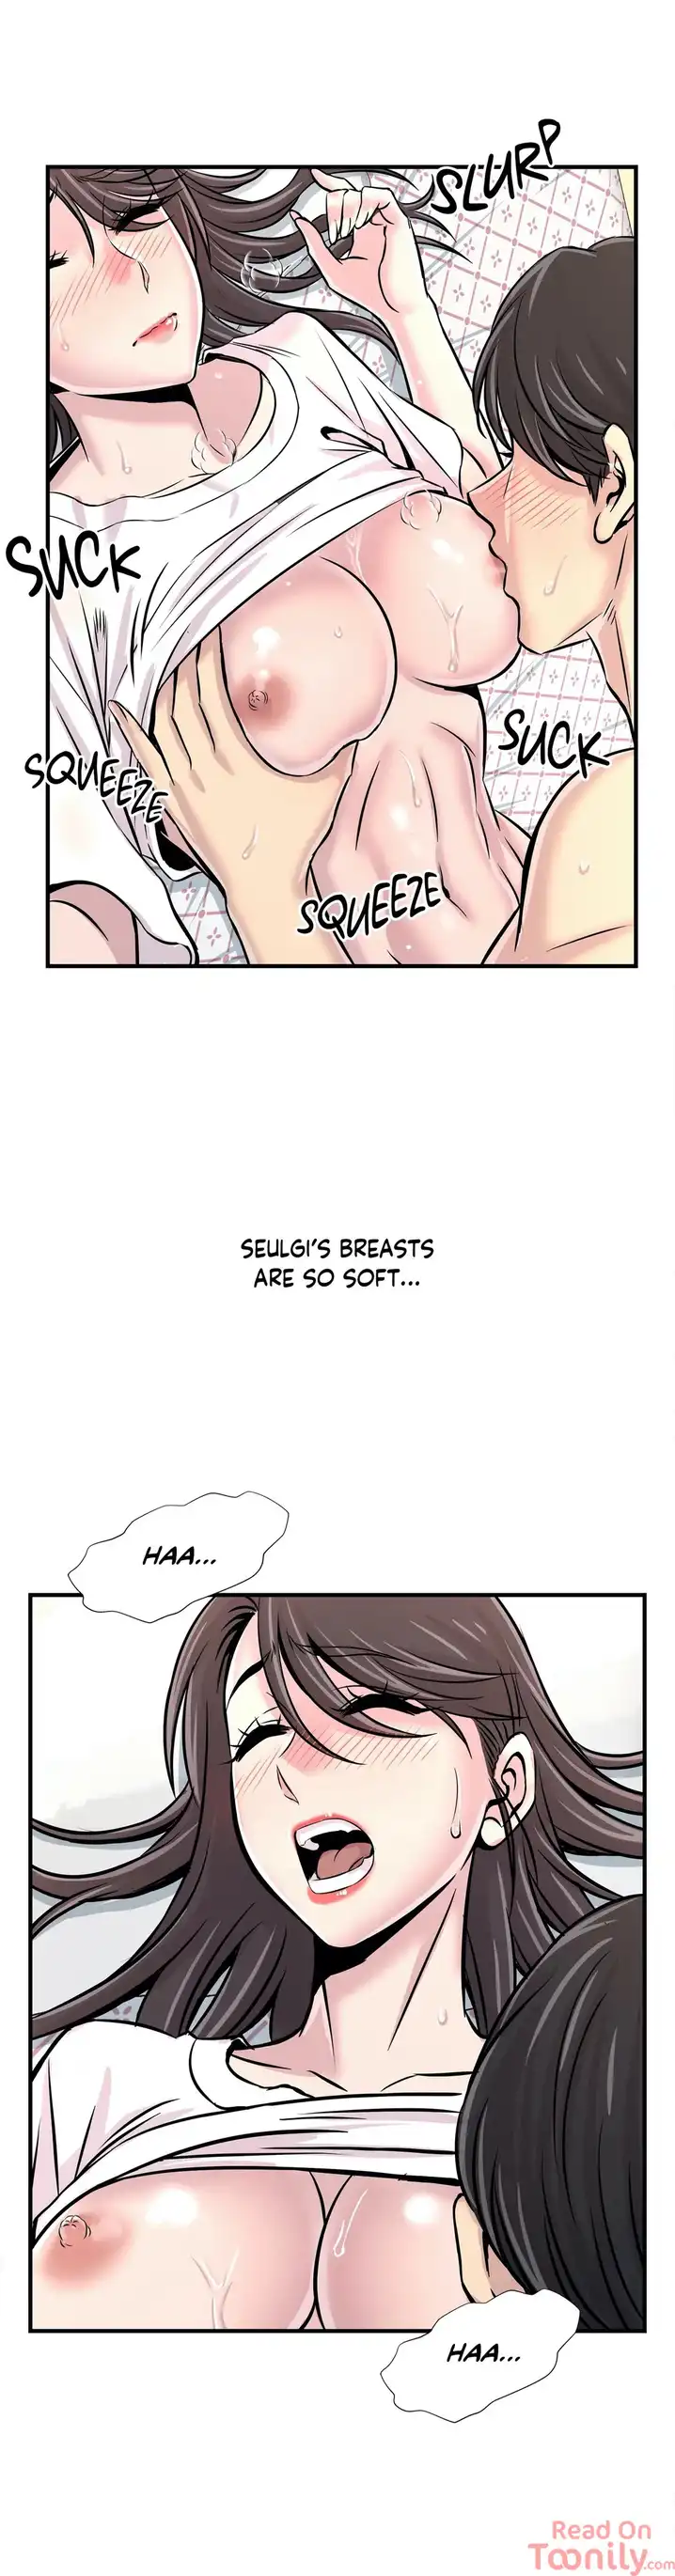 Cram School Scandal - Chapter 29 Page 8